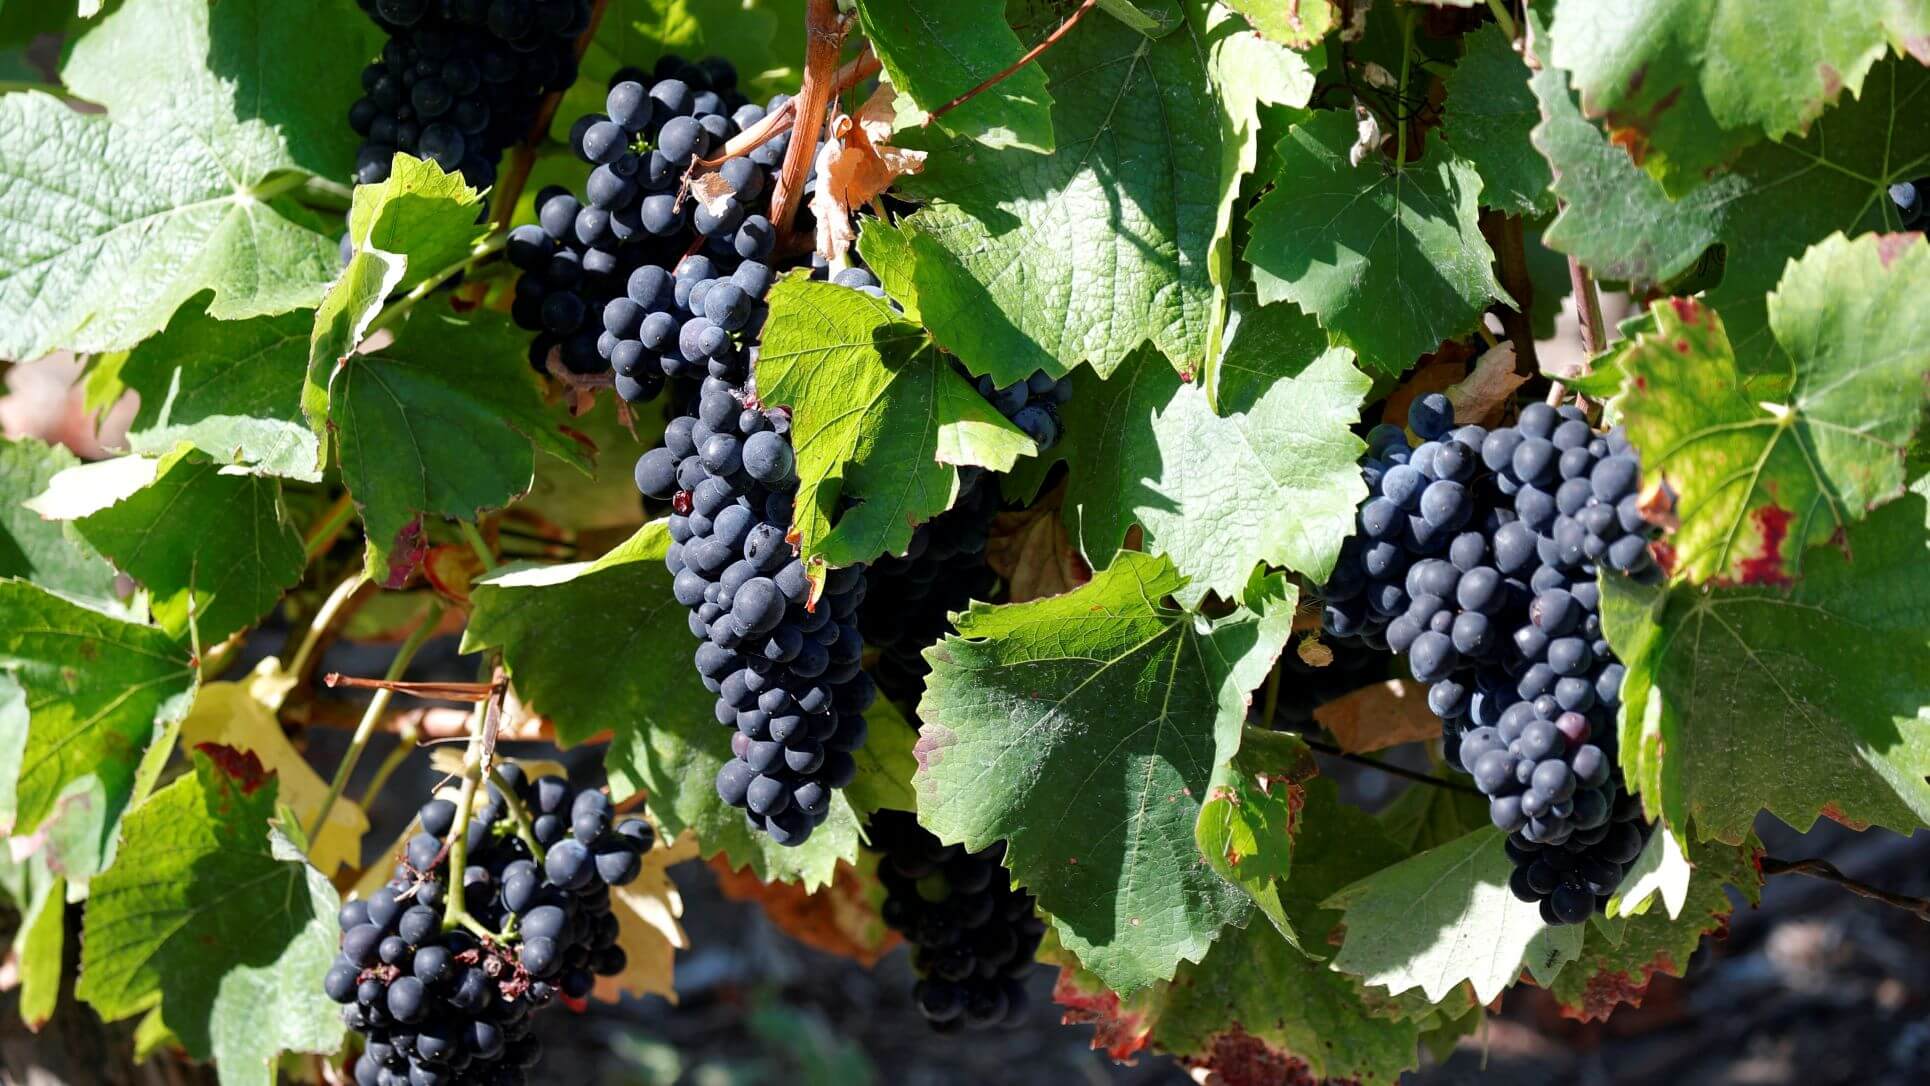 France Sees Wine Output Up 16% This Year Despite Drought